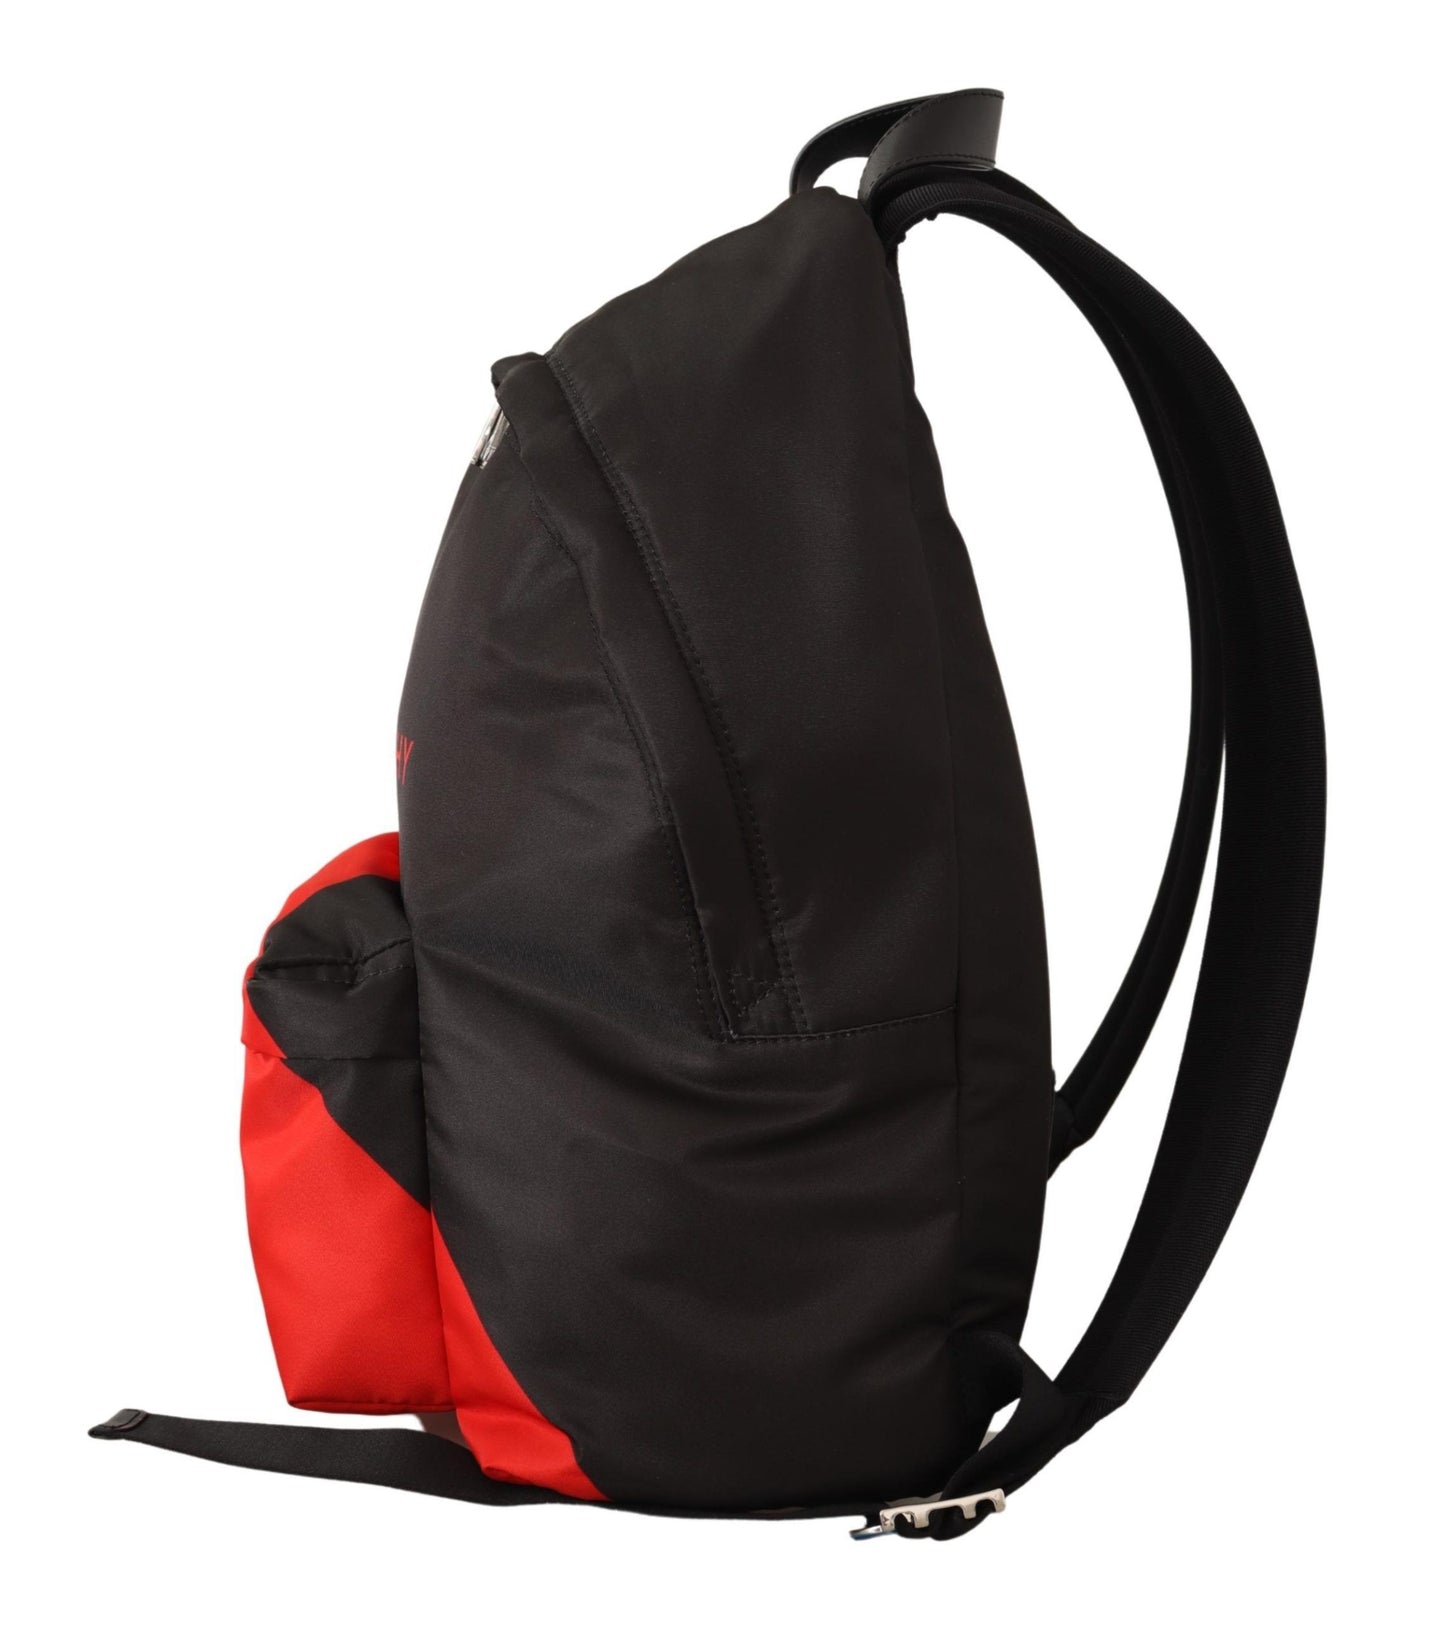 Givenchy Nylon Urban Backpack 'Red and Black'